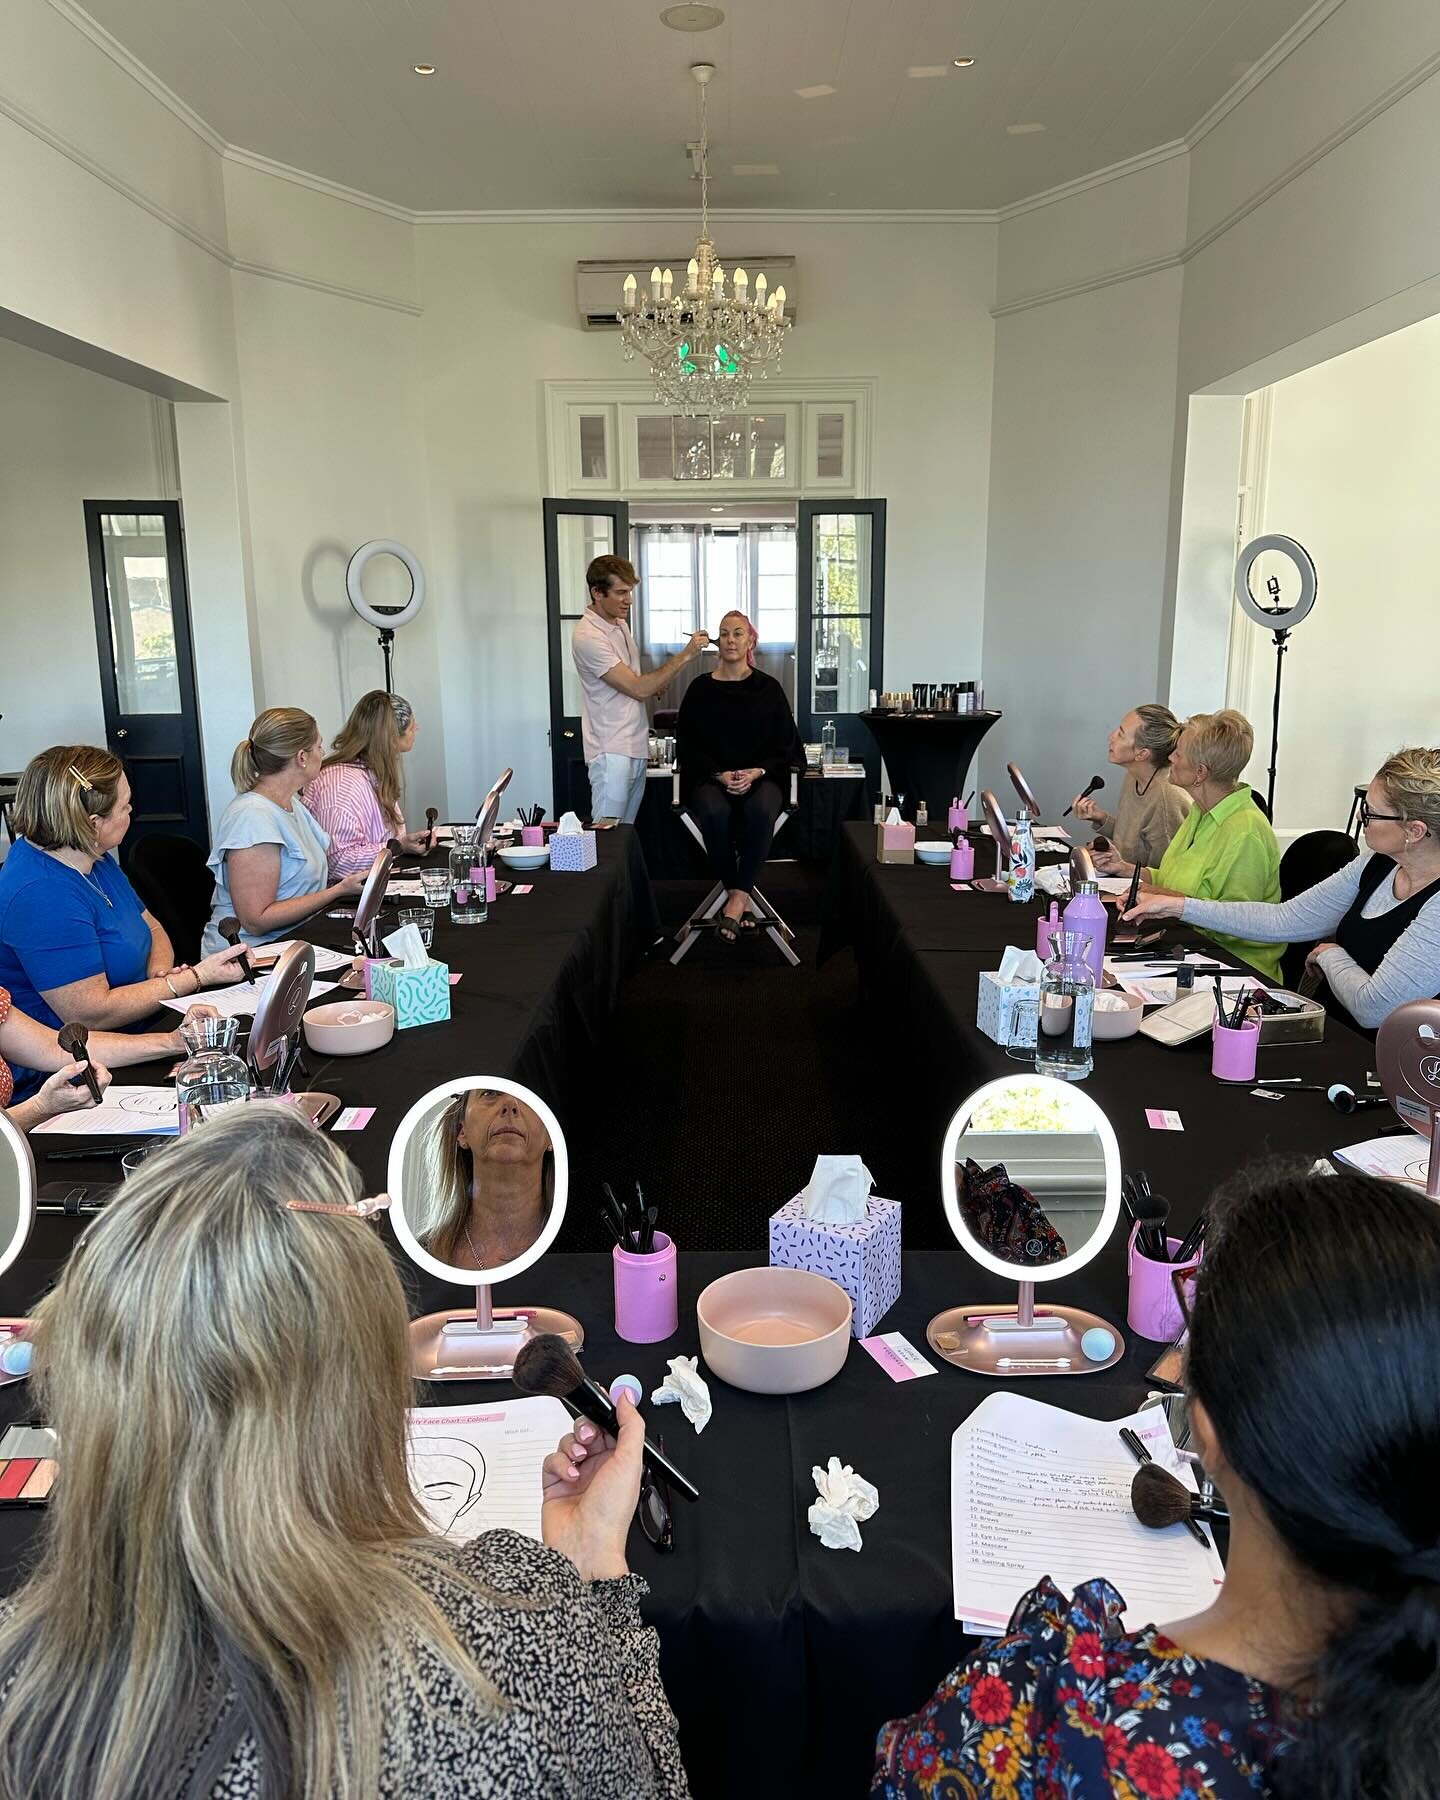 We did it 💄 Our biggest week at AB Beauty ever with 18 Makeup Masterclass across south east Queensland! Loved seeing all your beautiful faces at our classes this week 🤍 #sharingbeauty #makeupmasterclass #learnmakeup #abeauty